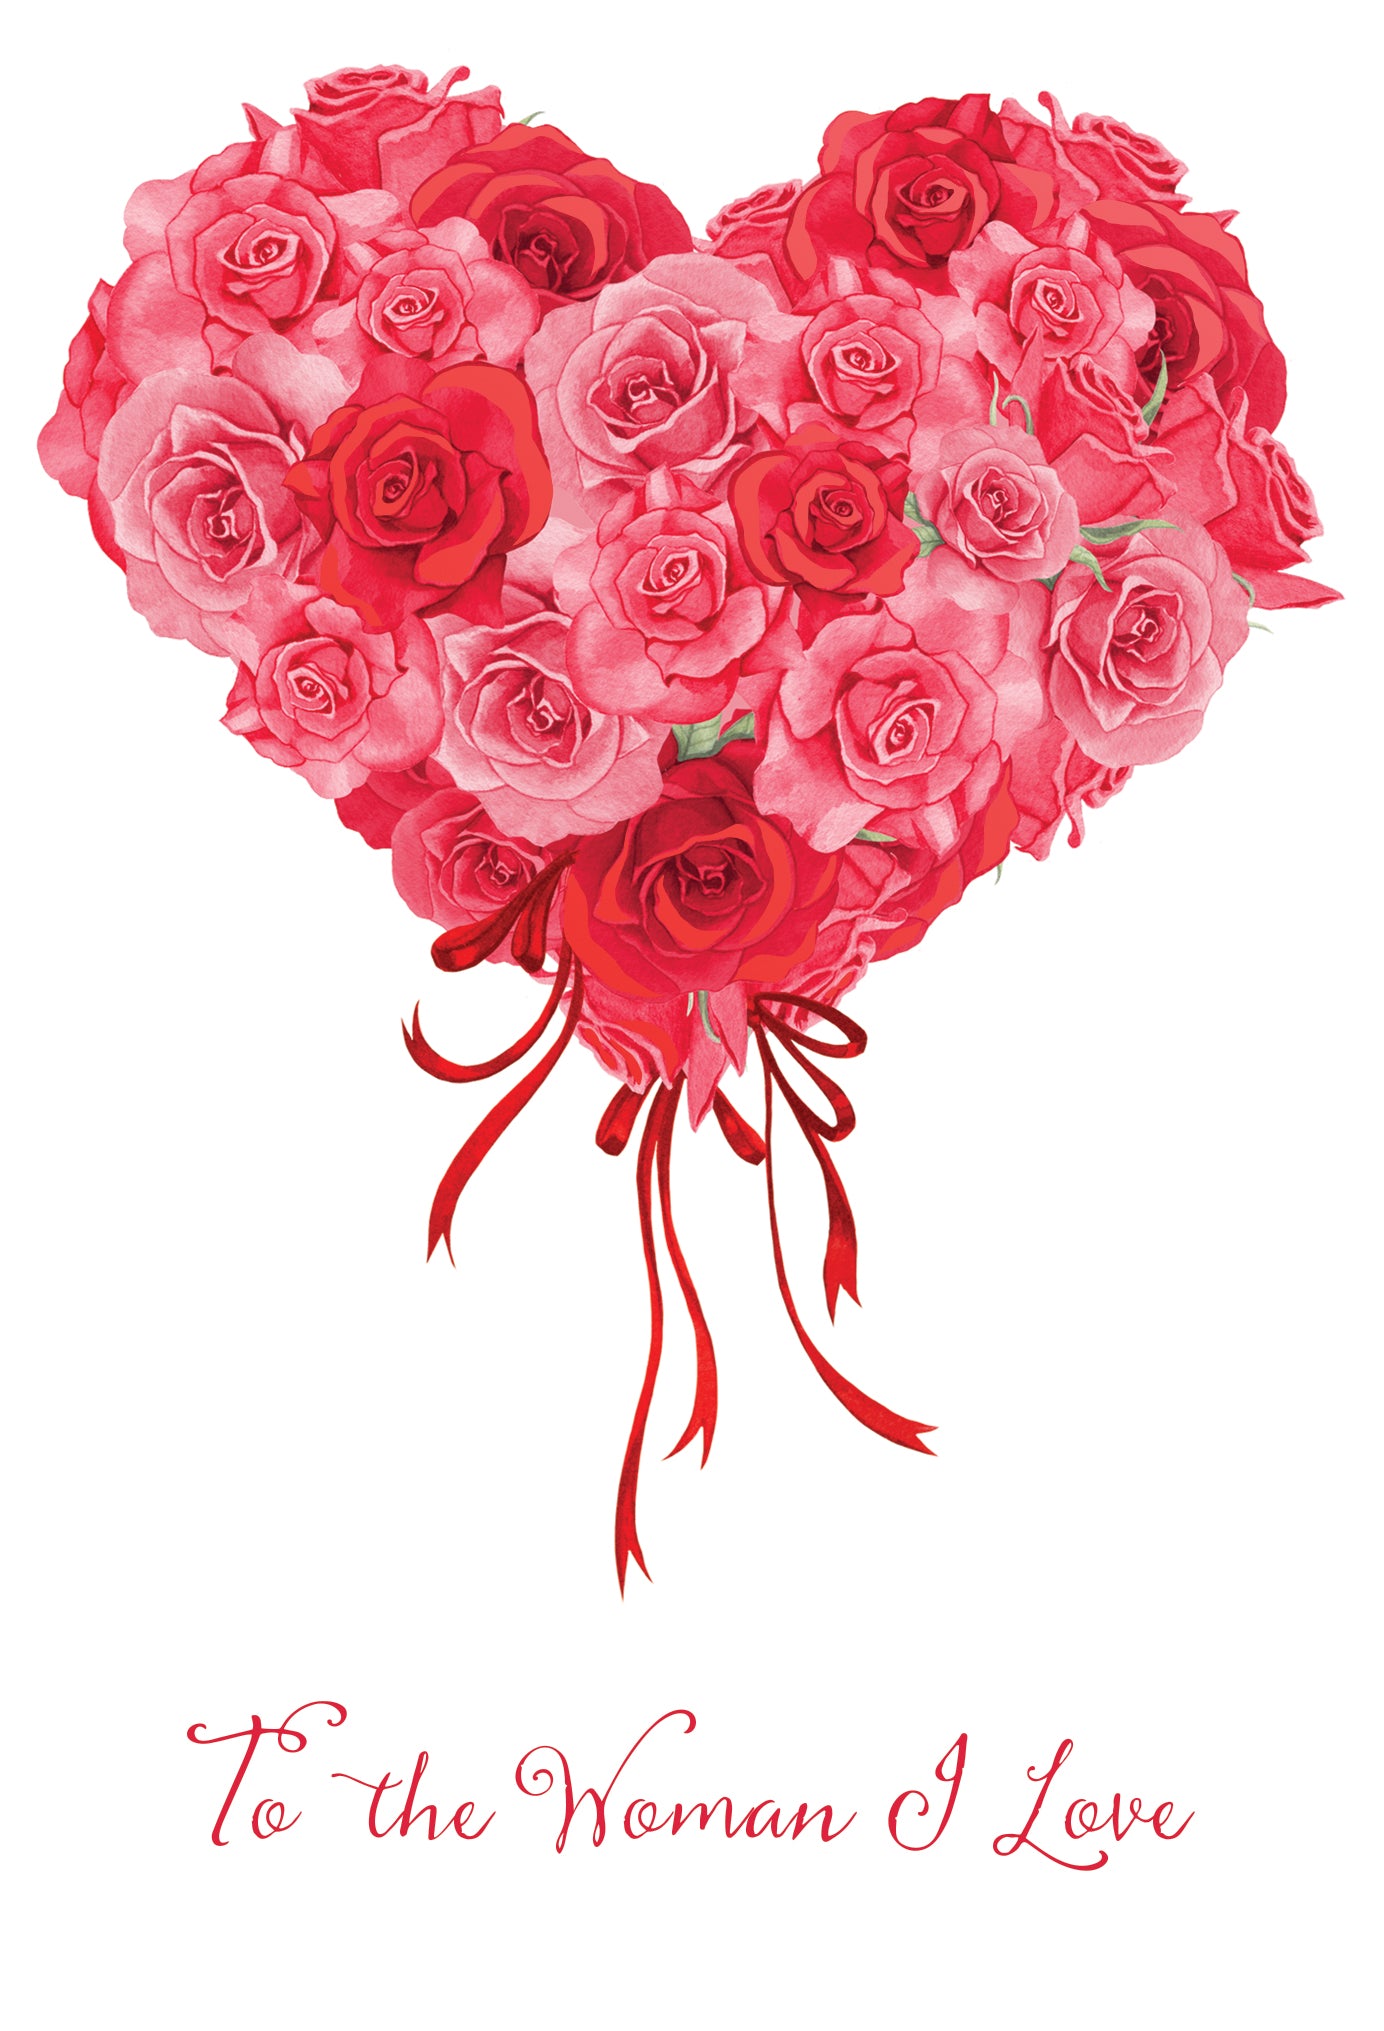 Heart Rose Bouquet Valentine's Day Card Woman I Love